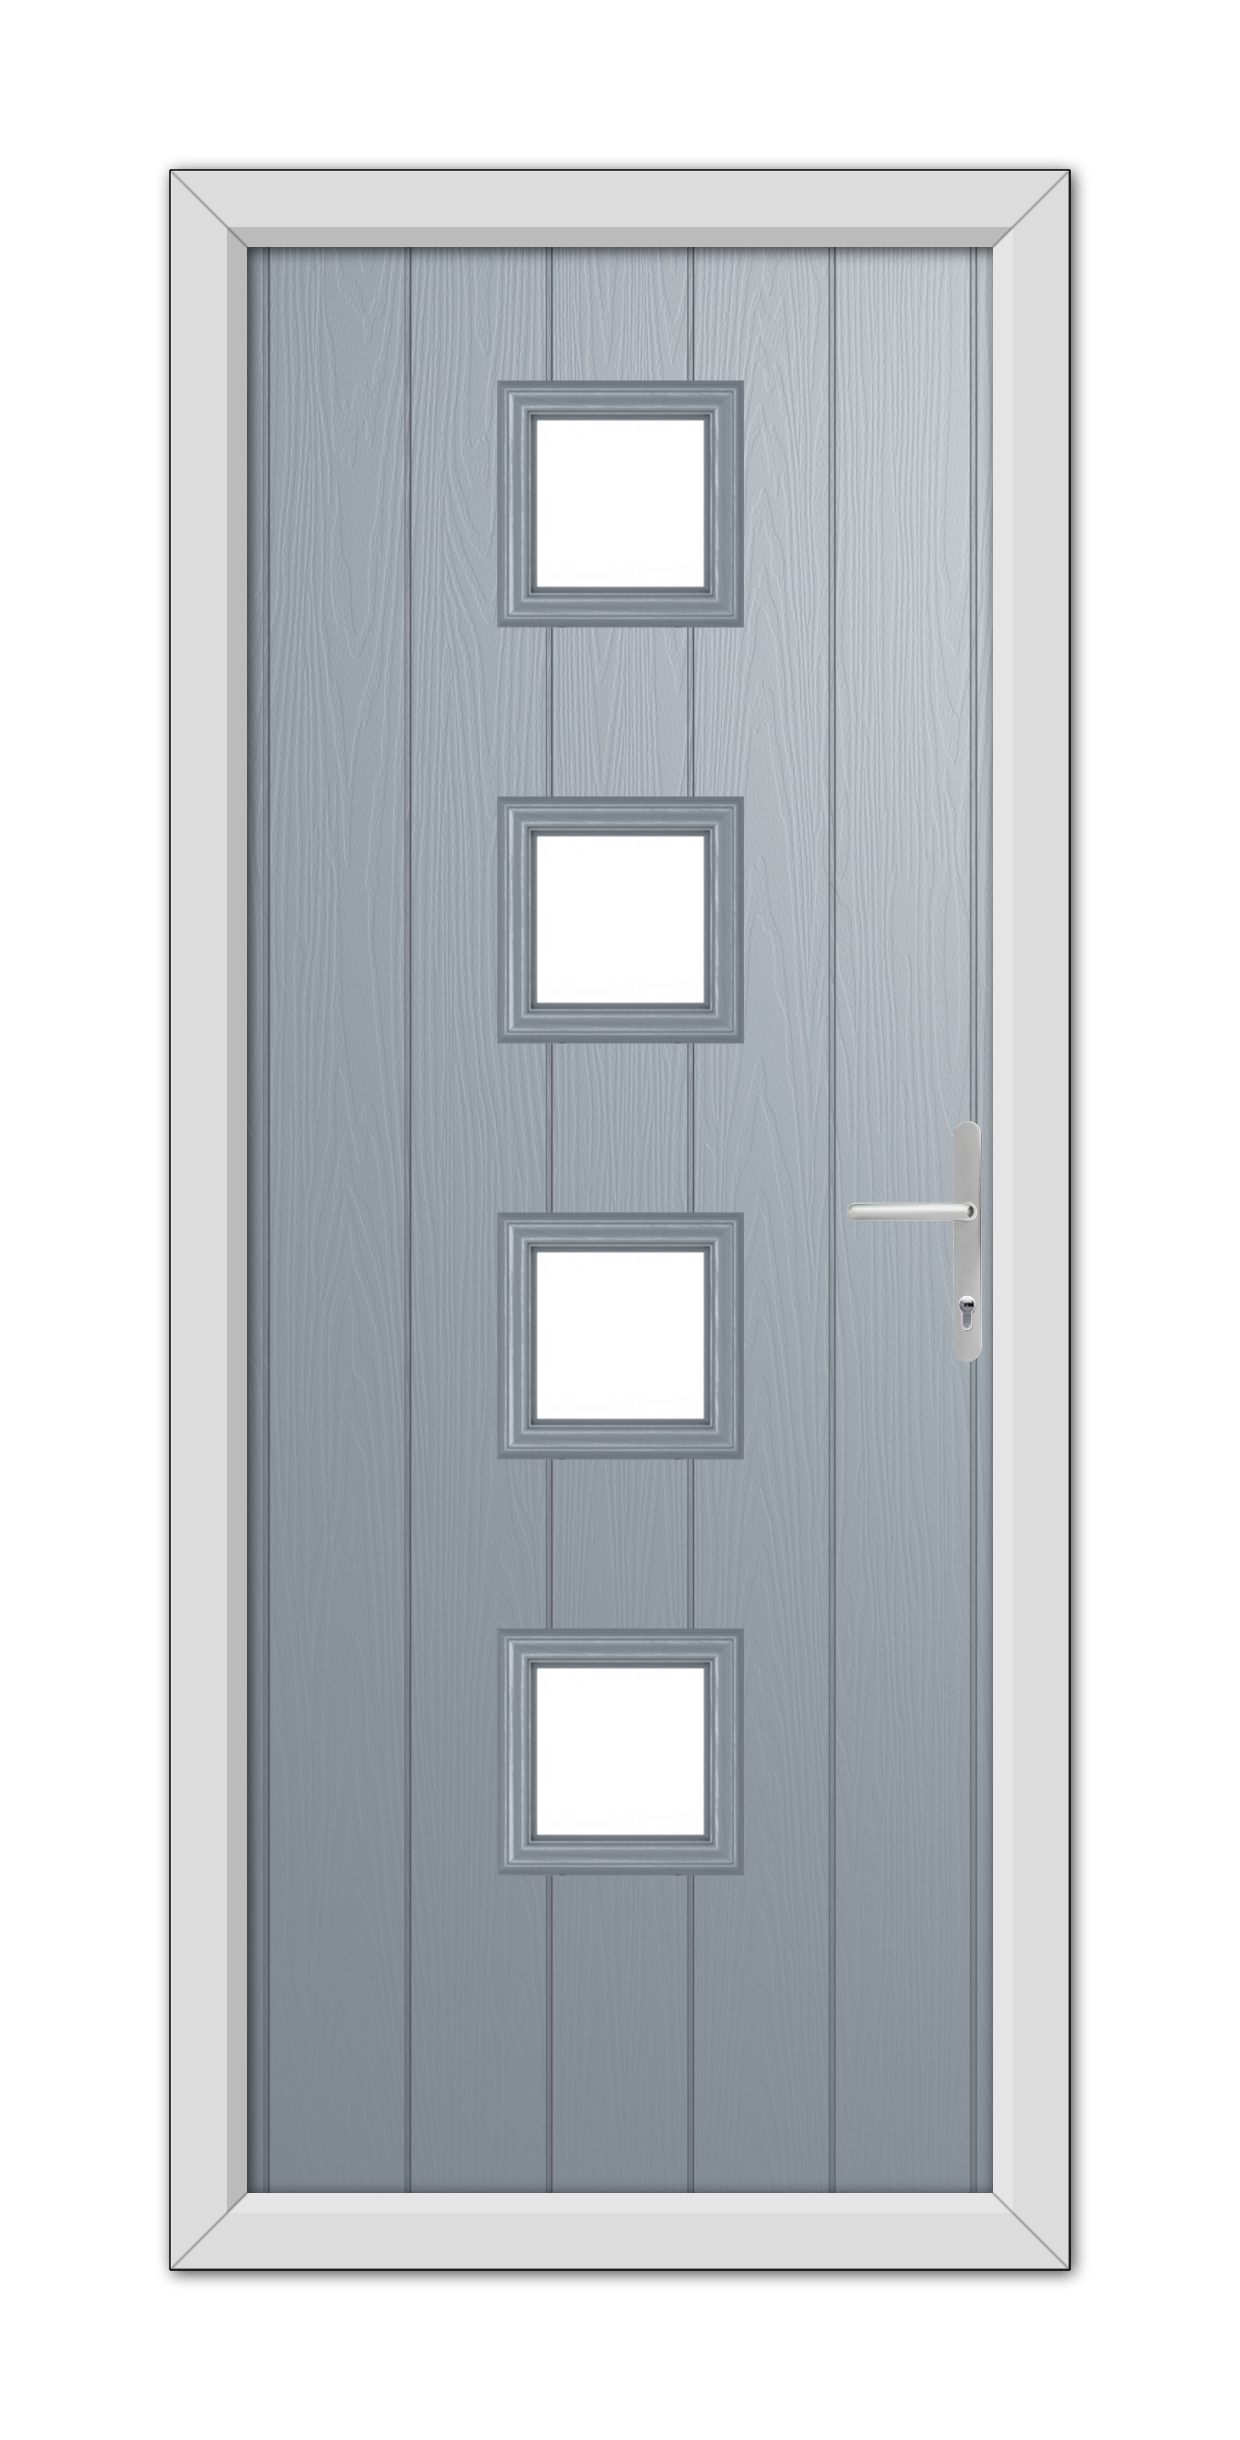 French Grey Hamilton Composite Door 48mm Timber Core with four rectangular glass panels and a metallic handle, set within a white frame.